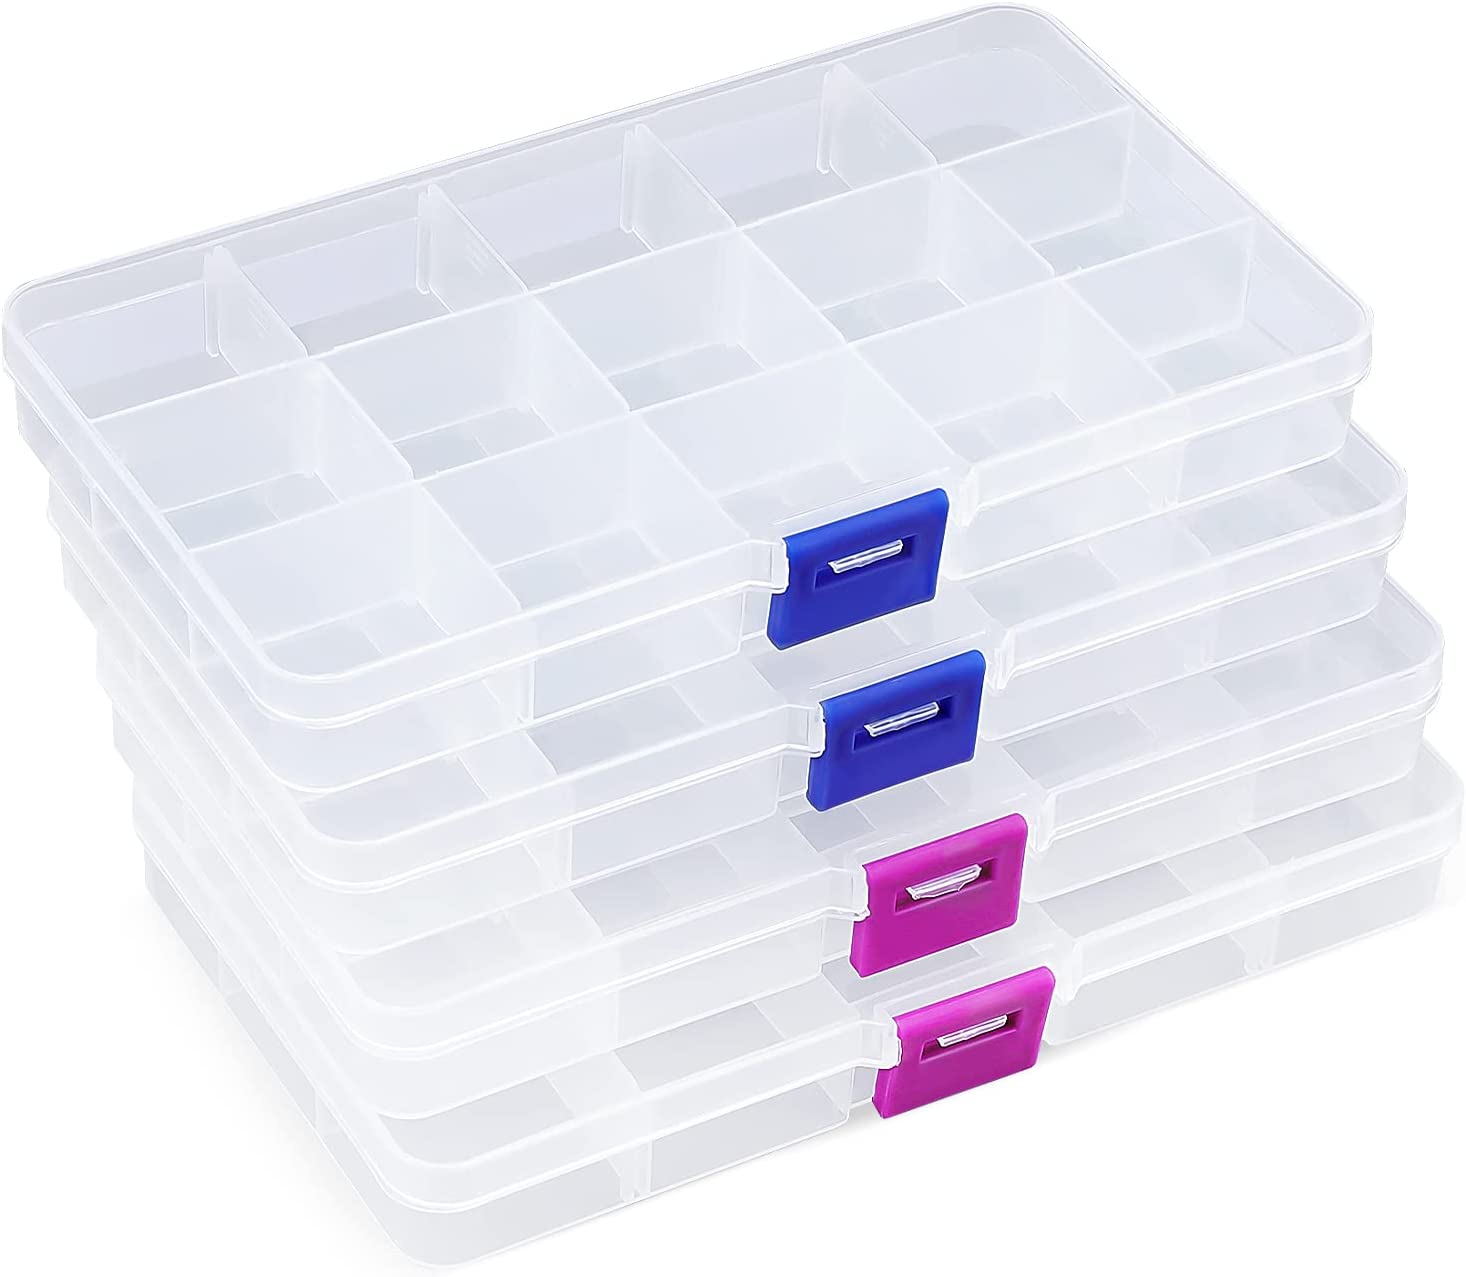 TRIANU 4 Pack Transparent Small Plastic Jewelry Organizer Box, 15 Grids  Plastic Storage Containers with Removable Dividers for Art and Crafts,  6.81*3.85*0.9 inches 